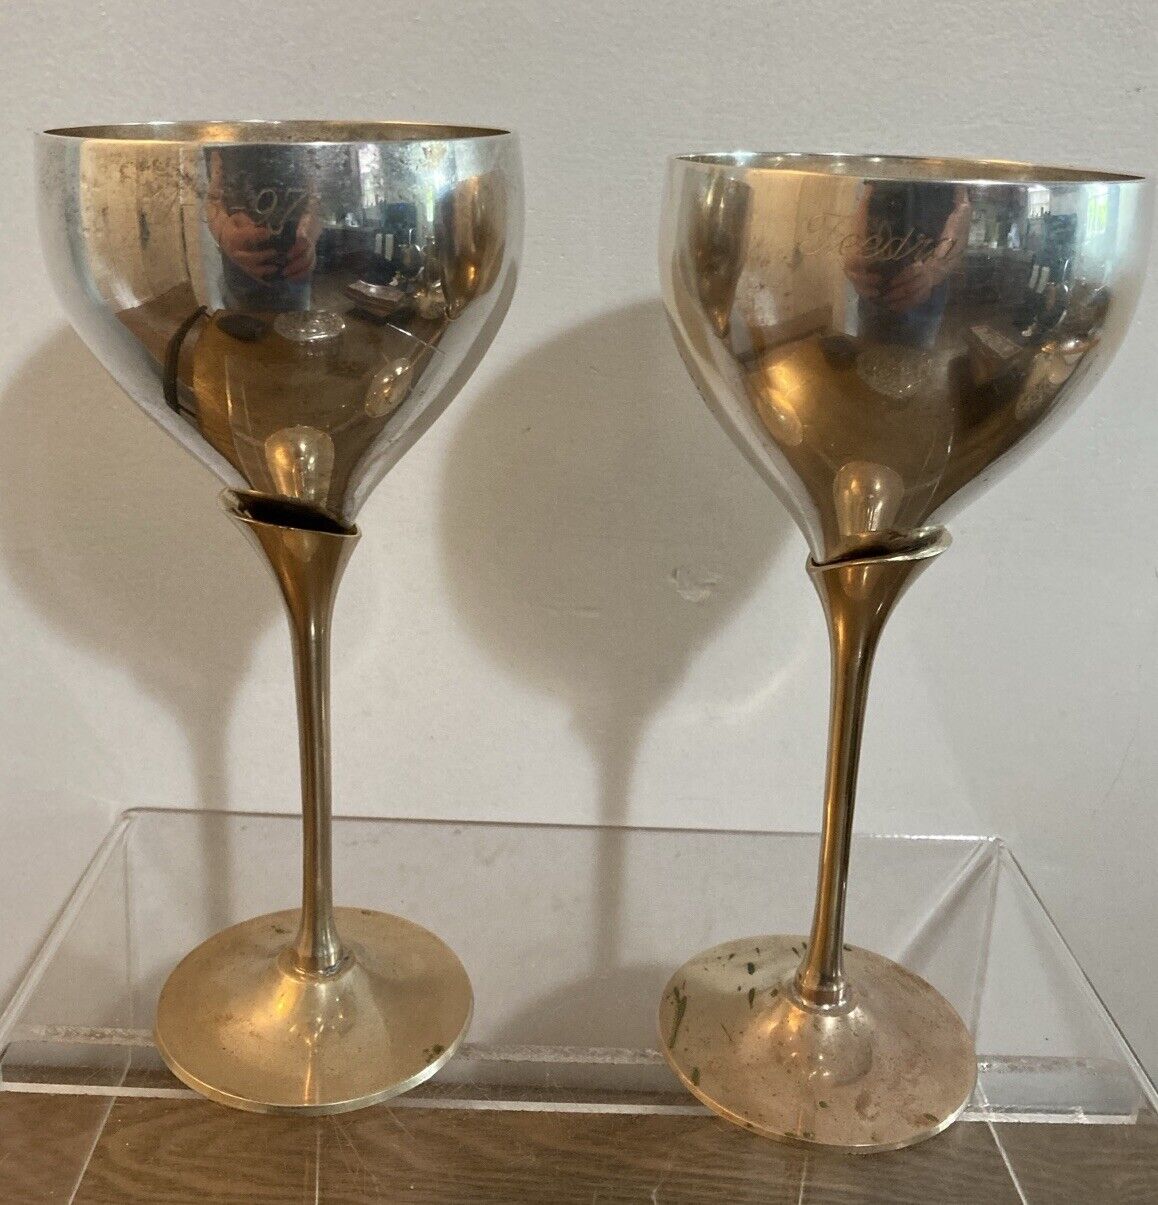 2 Nepali Style Brass Silver Wine Goblets India Wedding Anniversary Engraved 1997